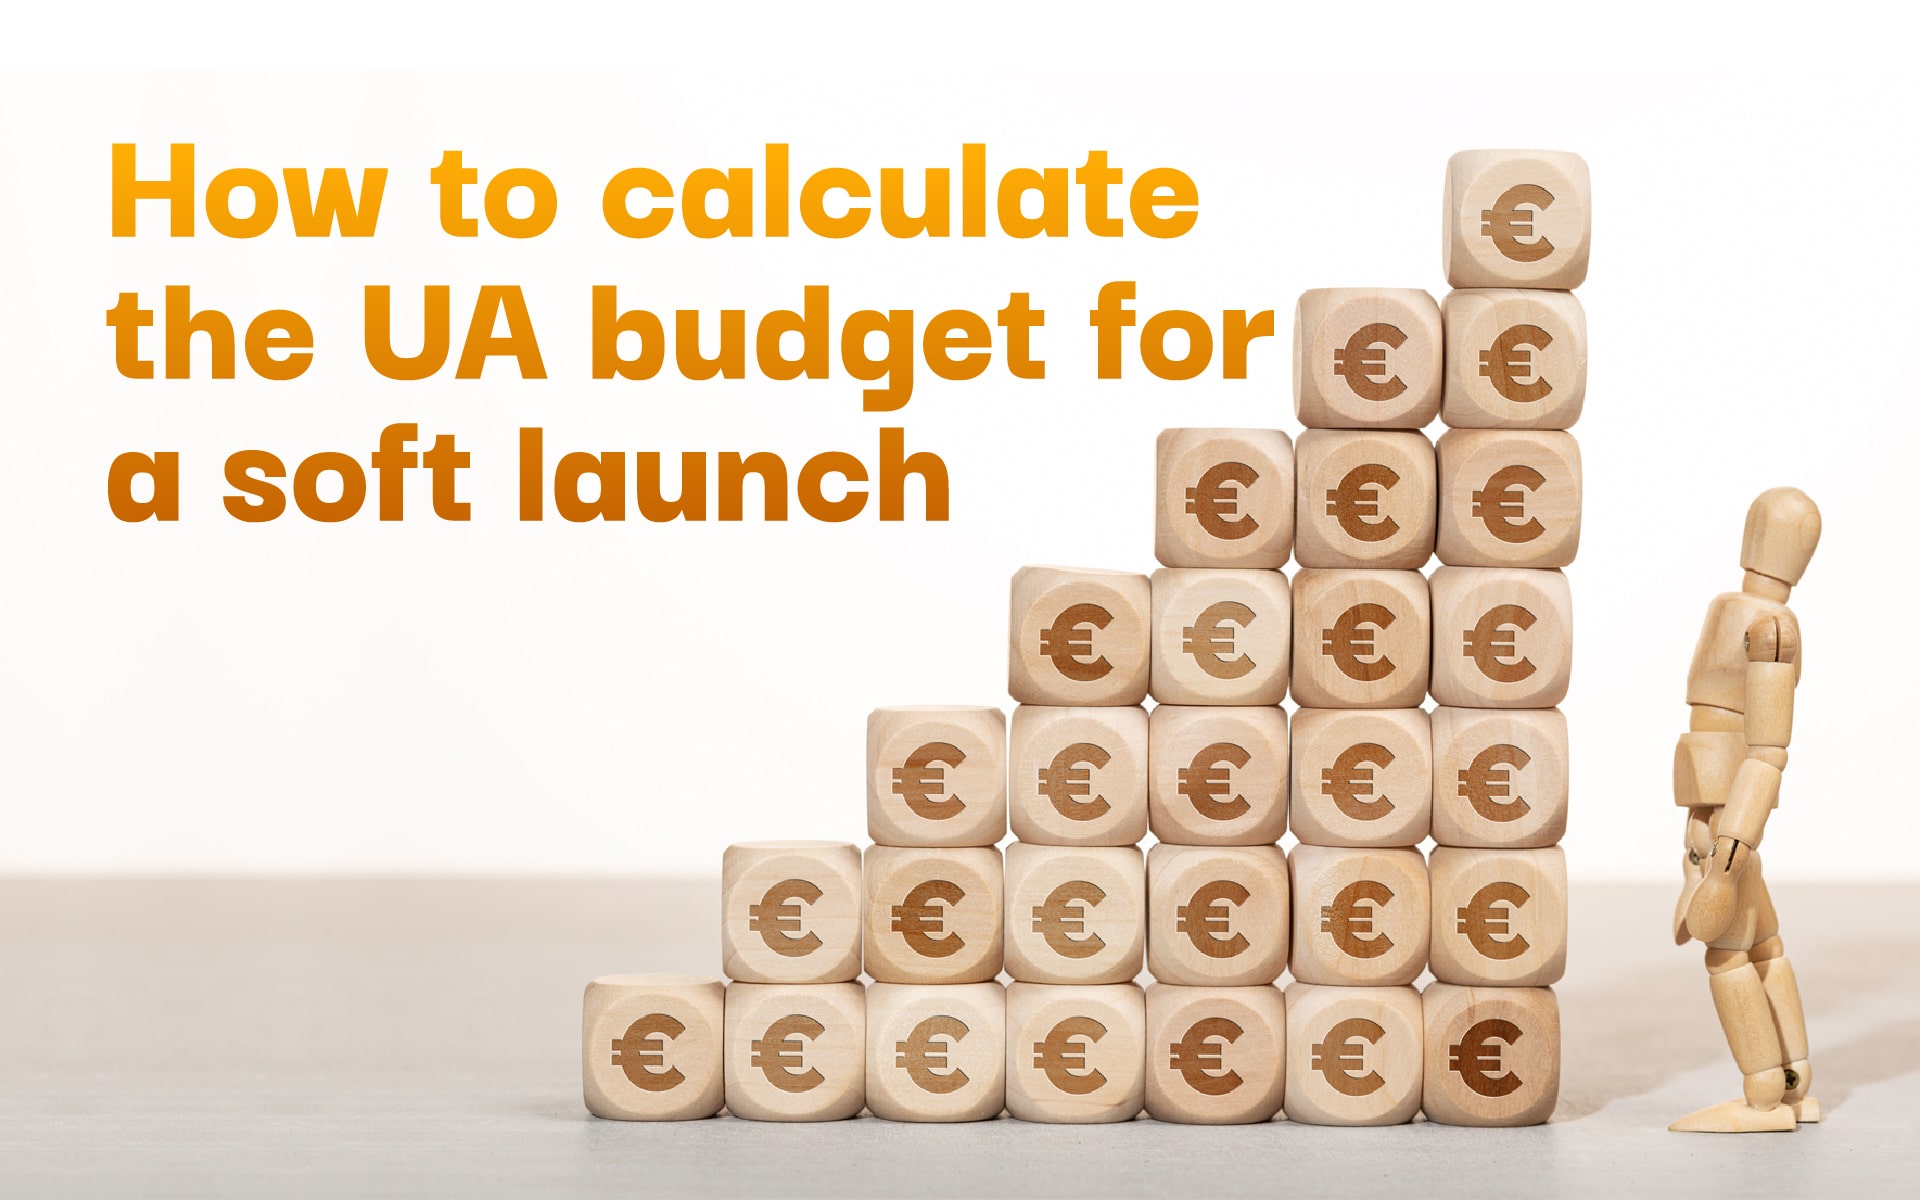 How to calculate the UA budget for a soft launch?